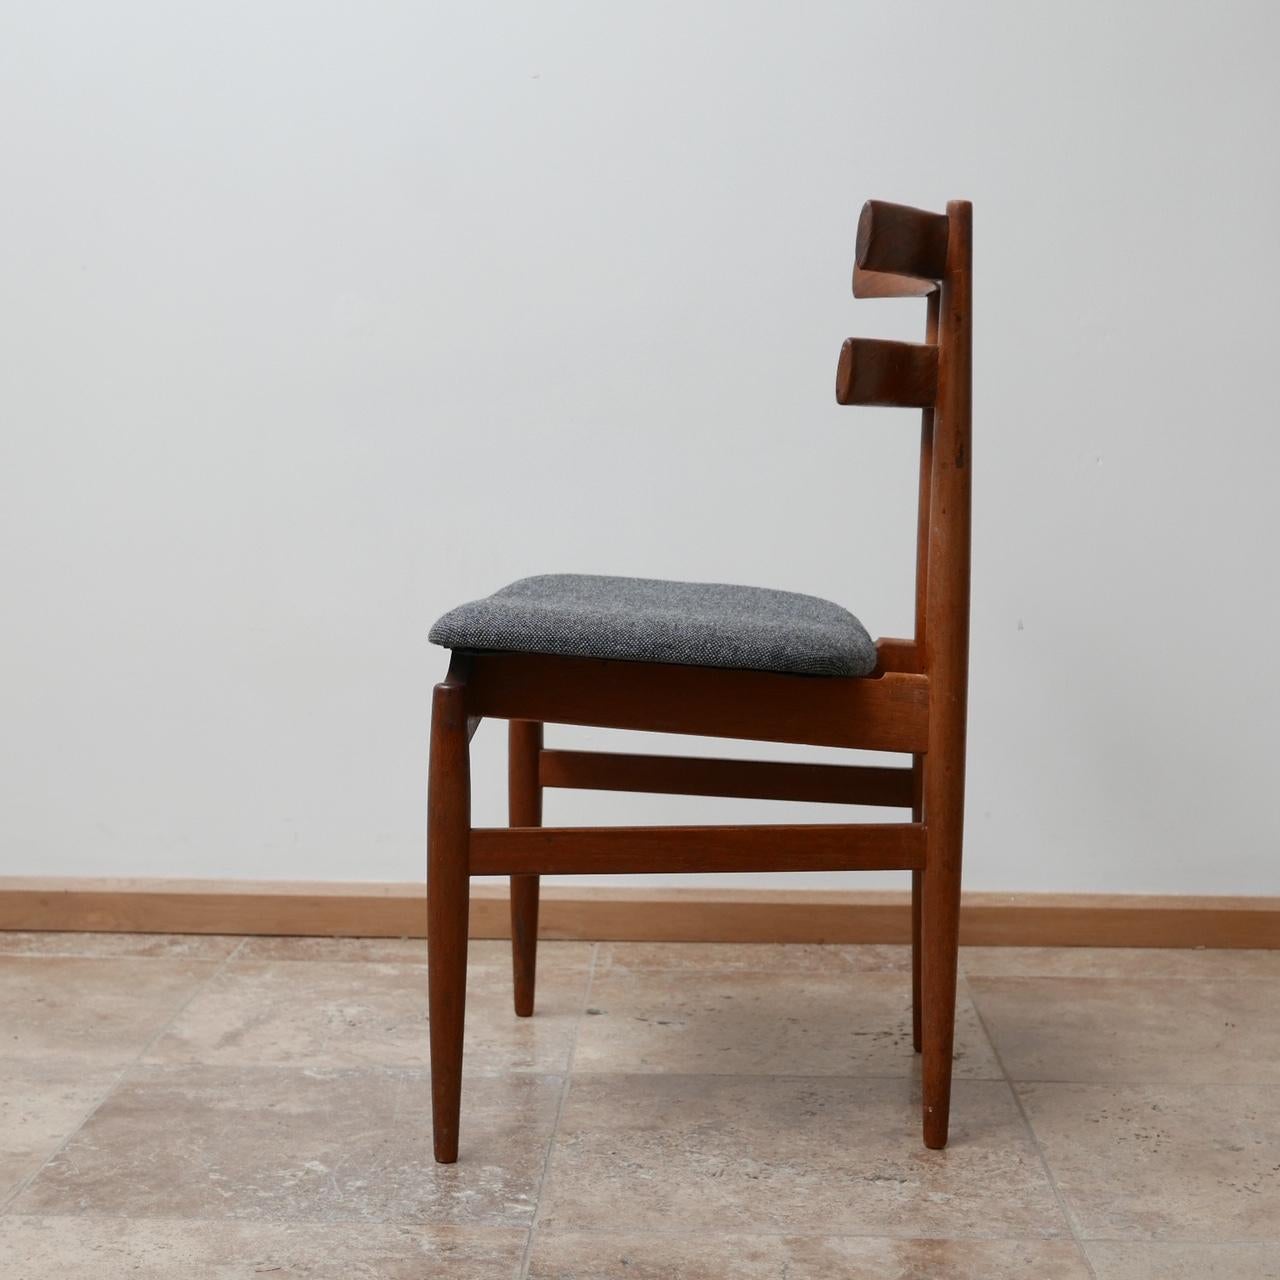 Teak Midcentury Dining Chairs by Poul Hundevad 3